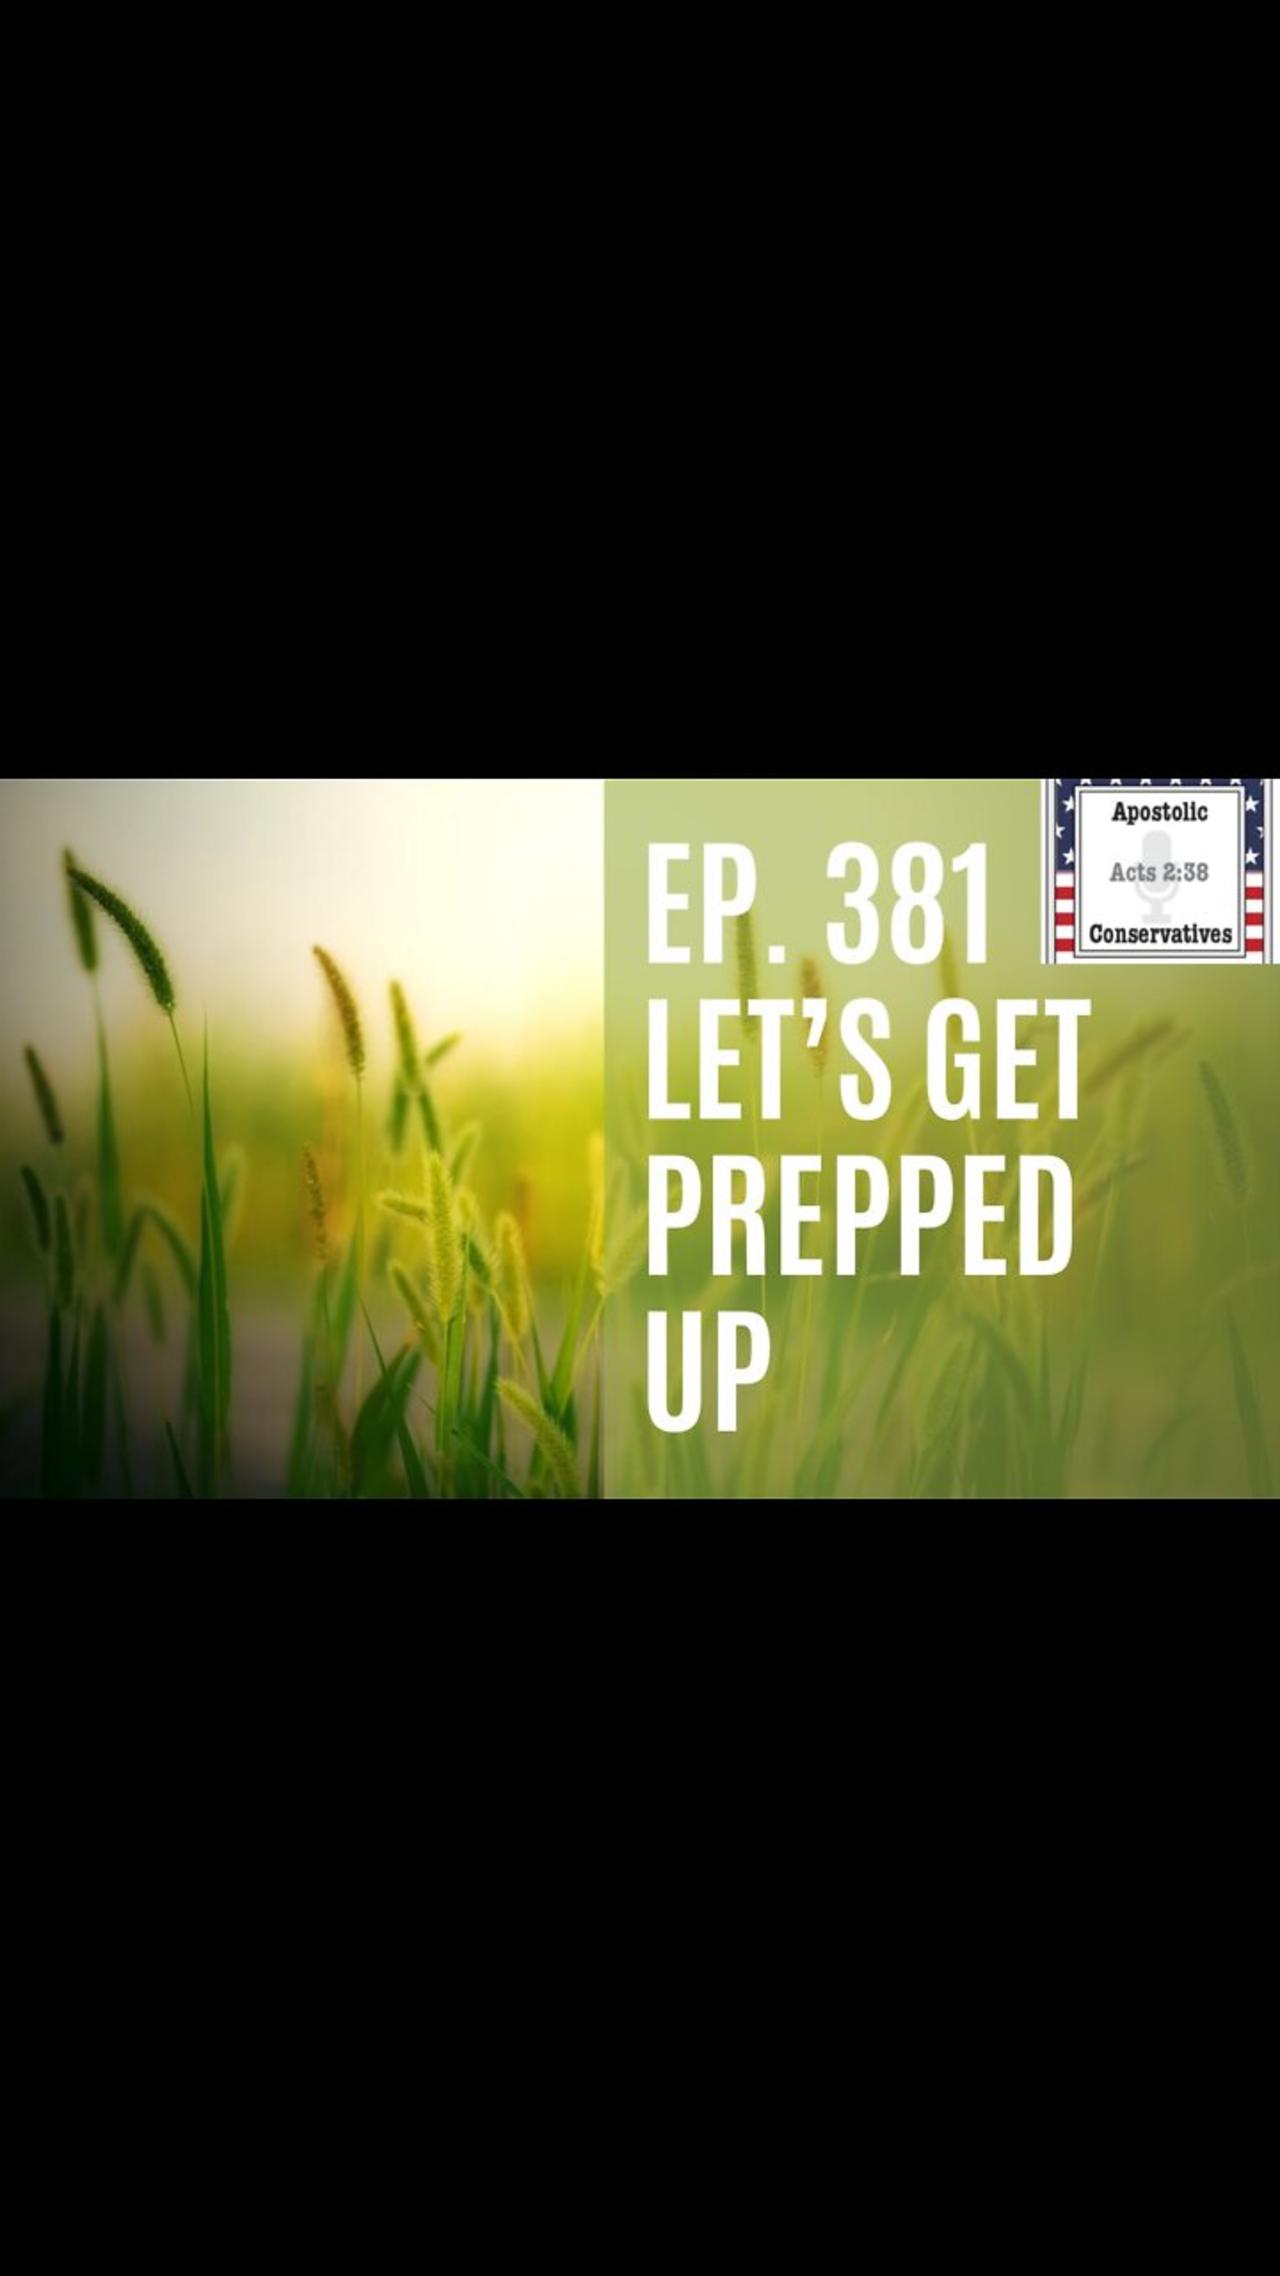 Shortage | replay Ep. 381 Let’s get prepped up 07-01-2022